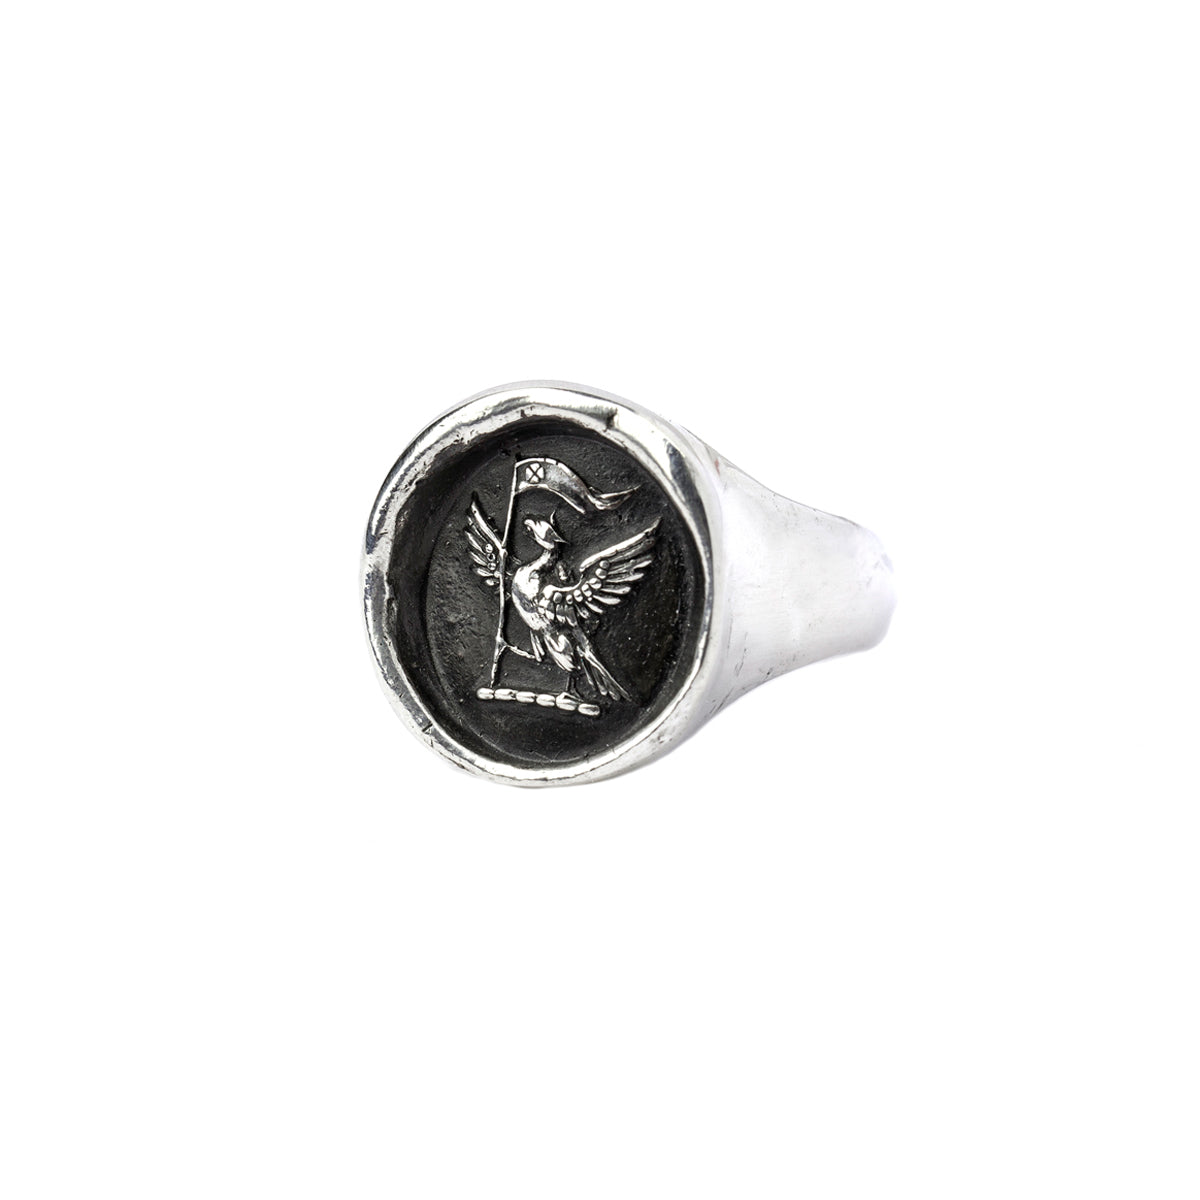 A sterling silver signet ring with our silver Never Settle talisman.